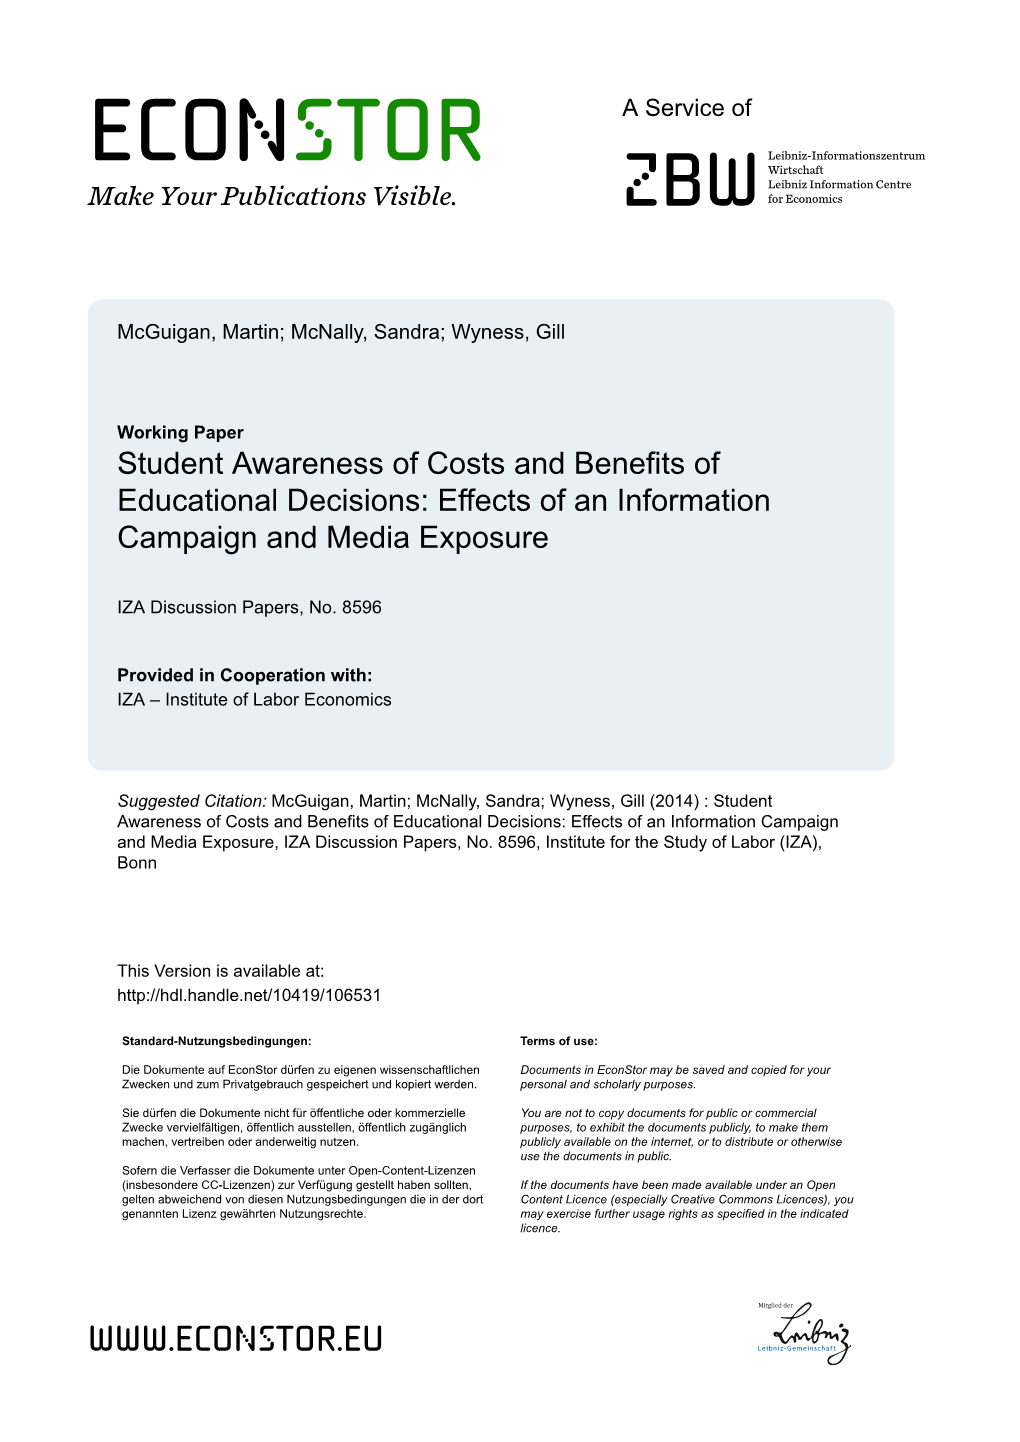 Student Awareness of Costs and Benefits of Educational Decisions: Effects of an Information Campaign and Media Exposure